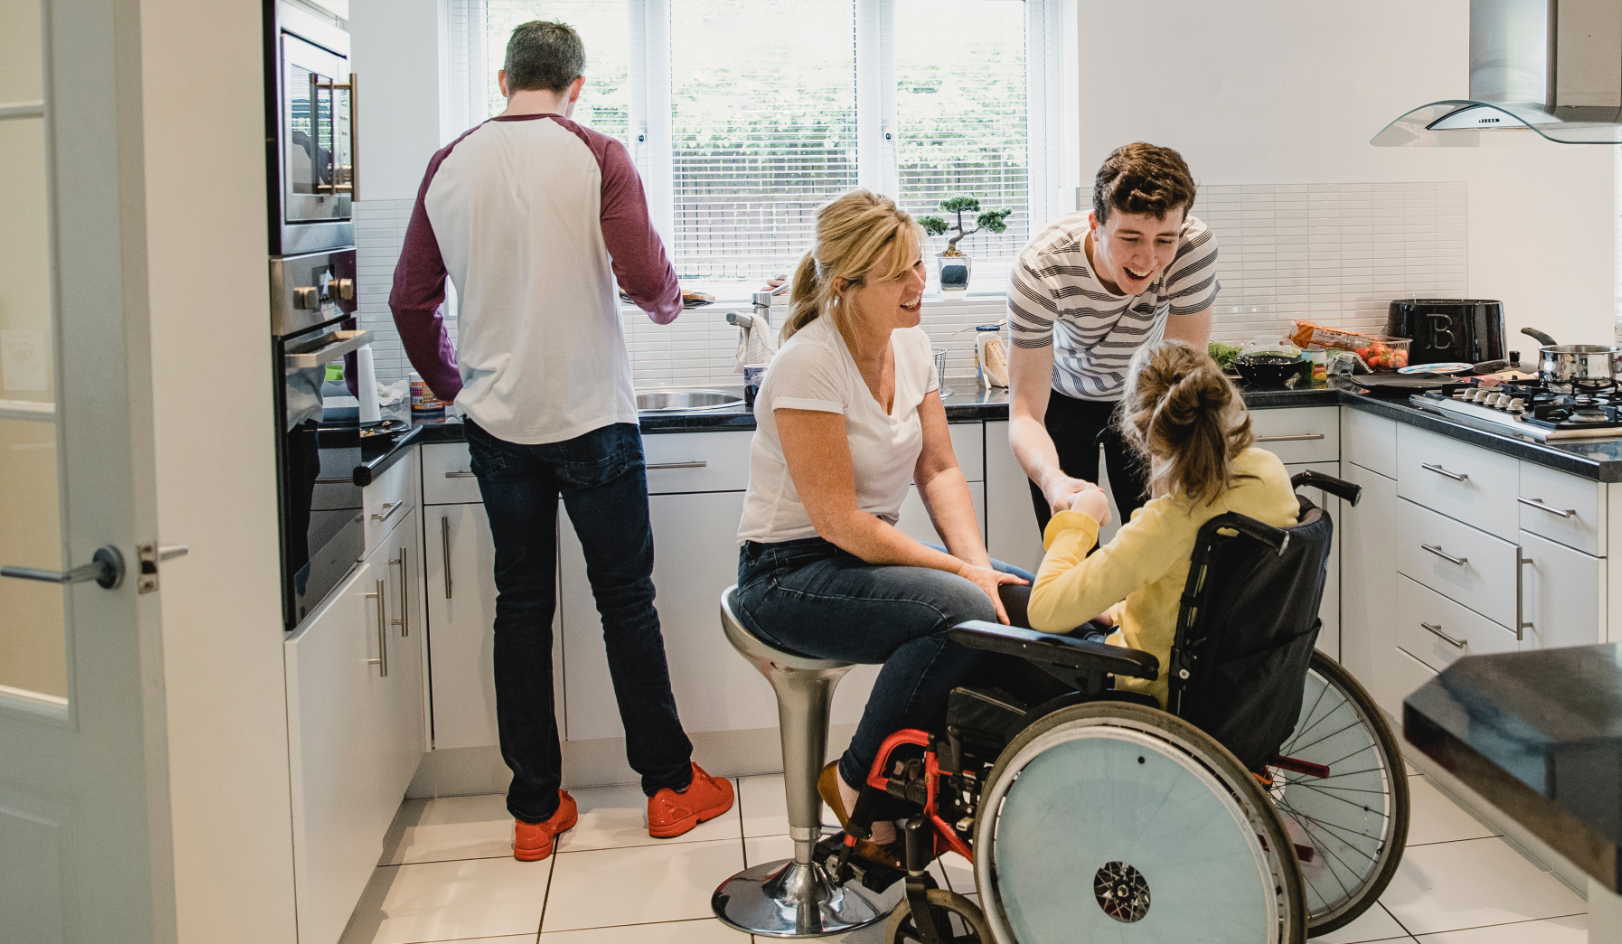 A mom, dad, brother and sister who is in a wheelchair in a kitchen setting